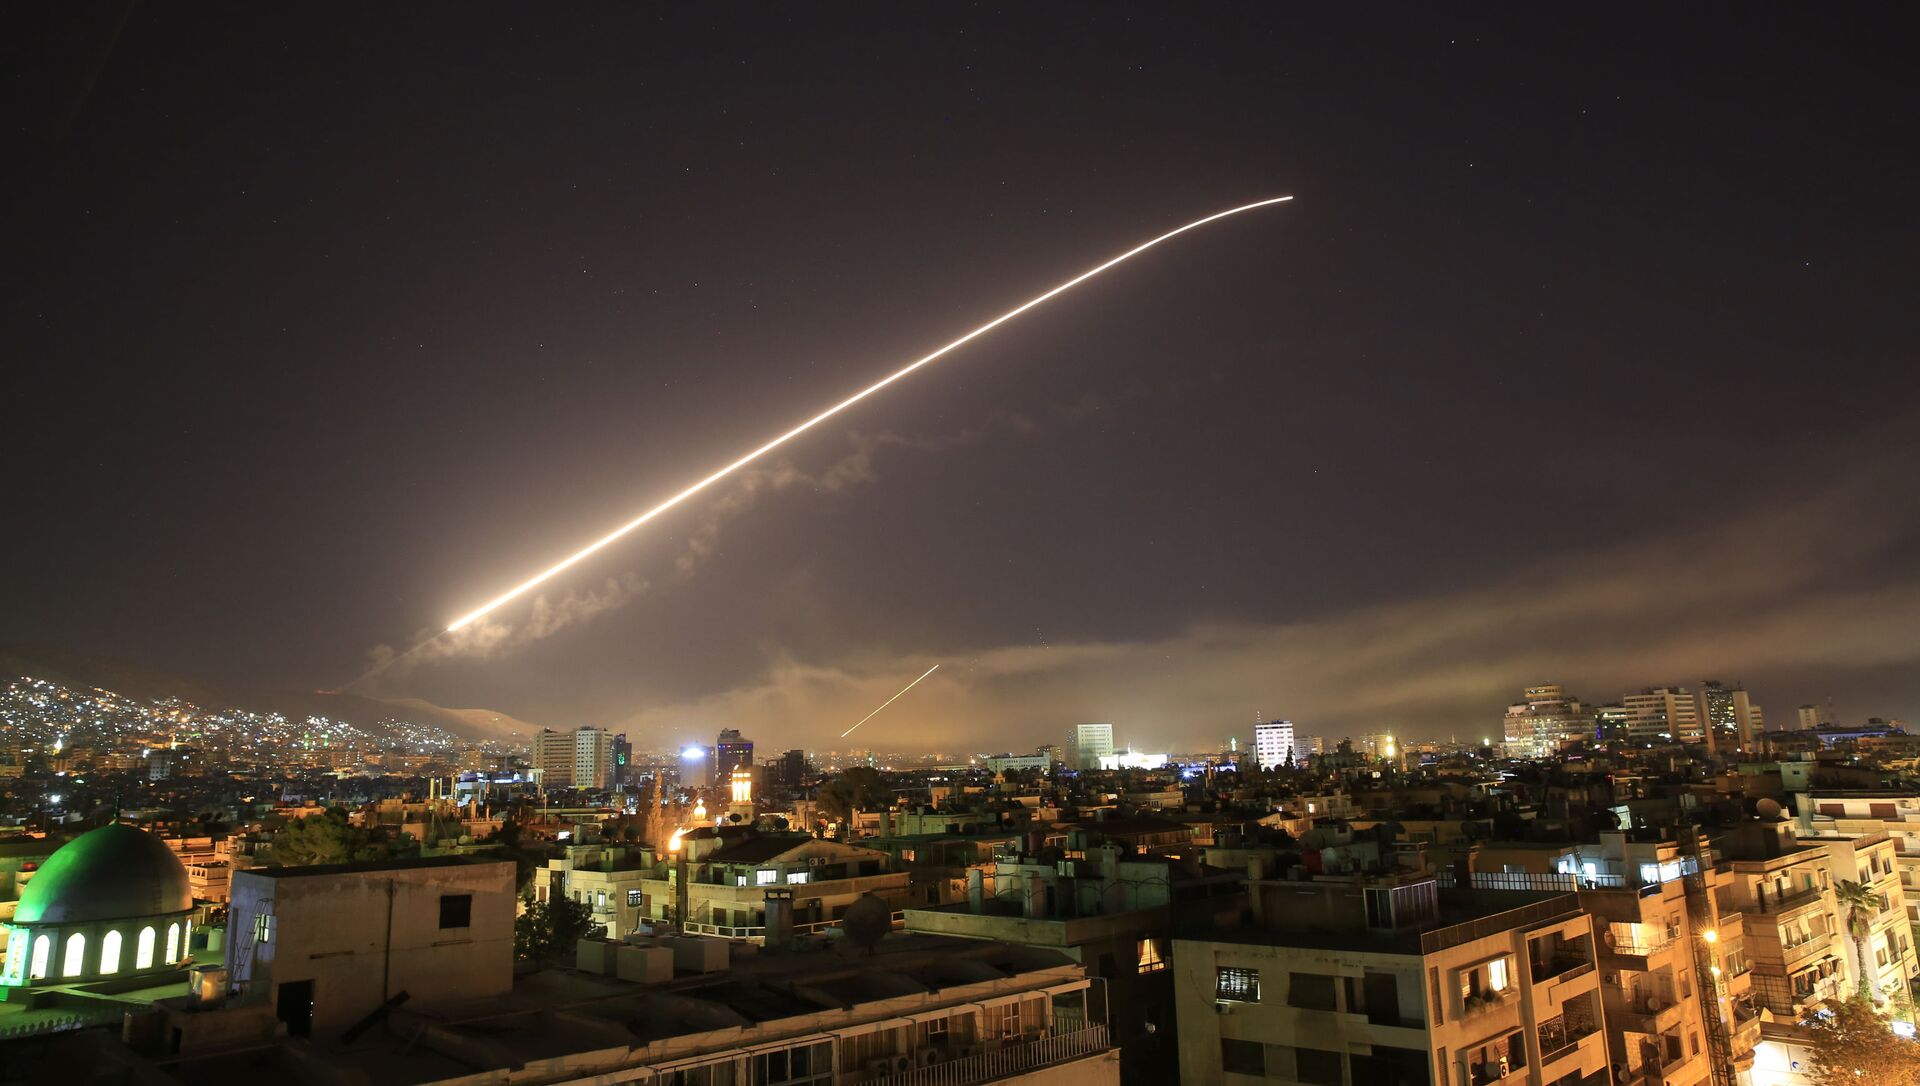 The Damascus sky lights up missile fire as the U.S. launches an attack on Syria targeting different parts of the capital early Saturday, April 14, 2018 - Sputnik Moldova, 1920, 01.03.2021